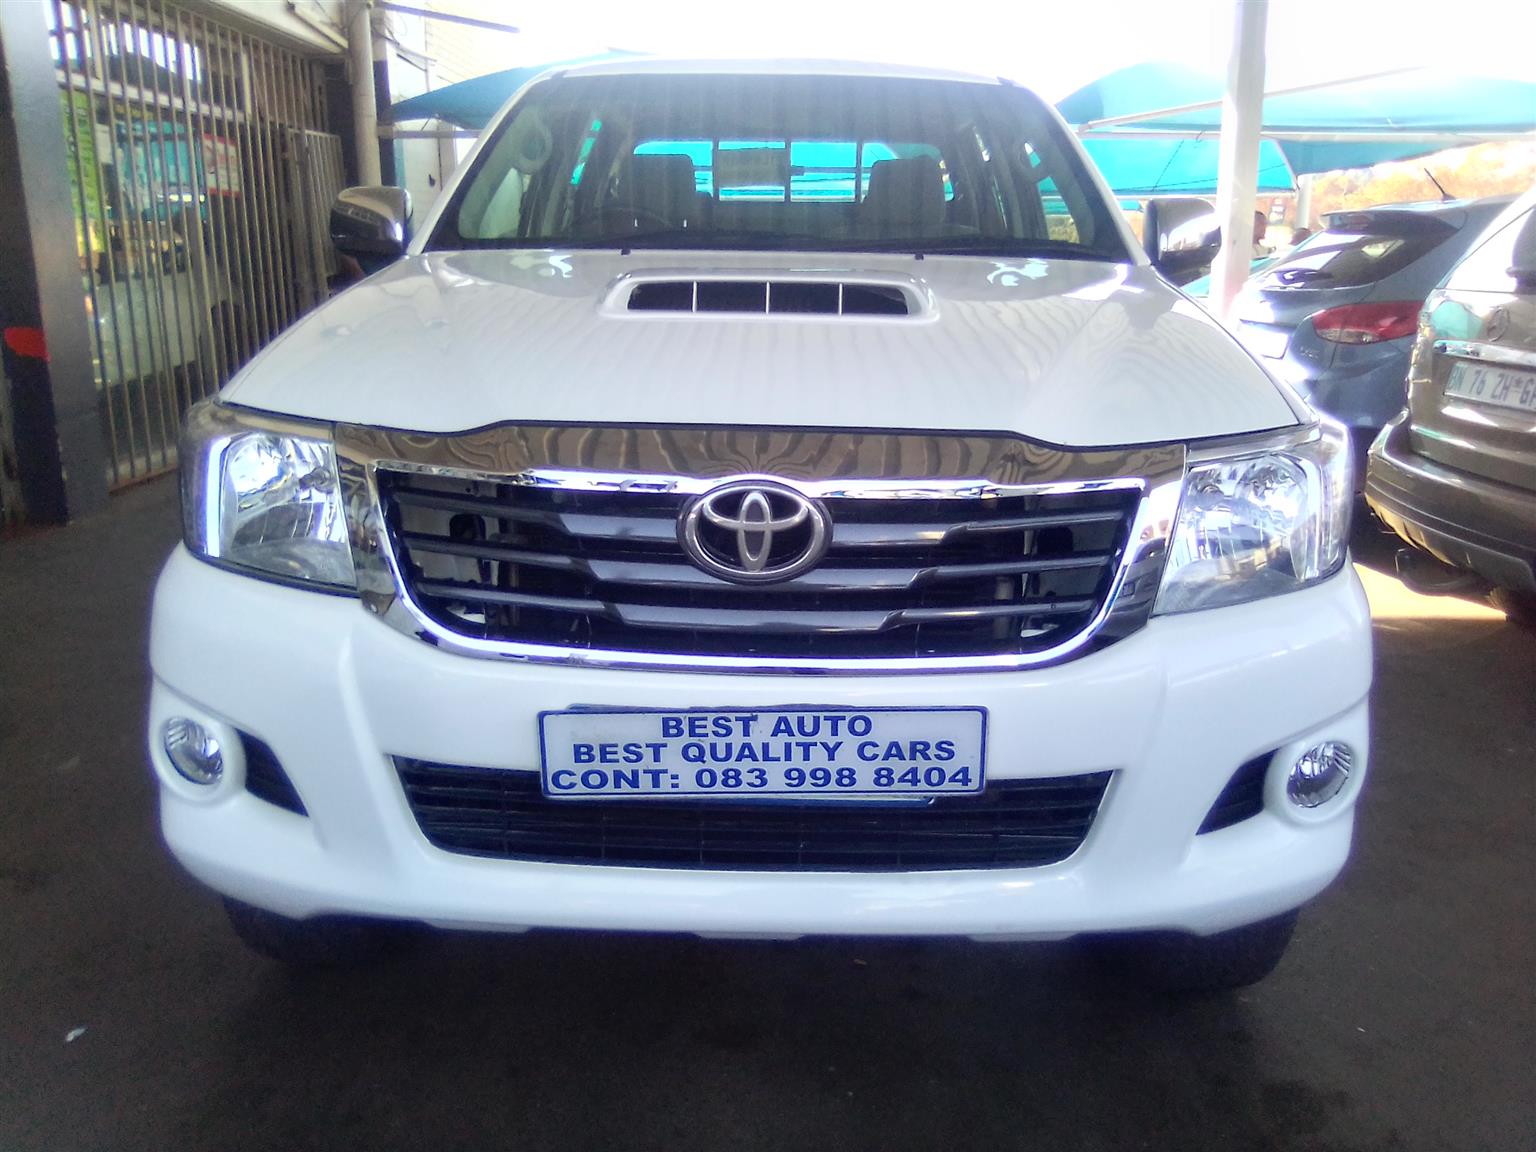 2011 Toyota Hilux 3.0 Engine Capacity 4×4 Double Cab with Automatic Transmission